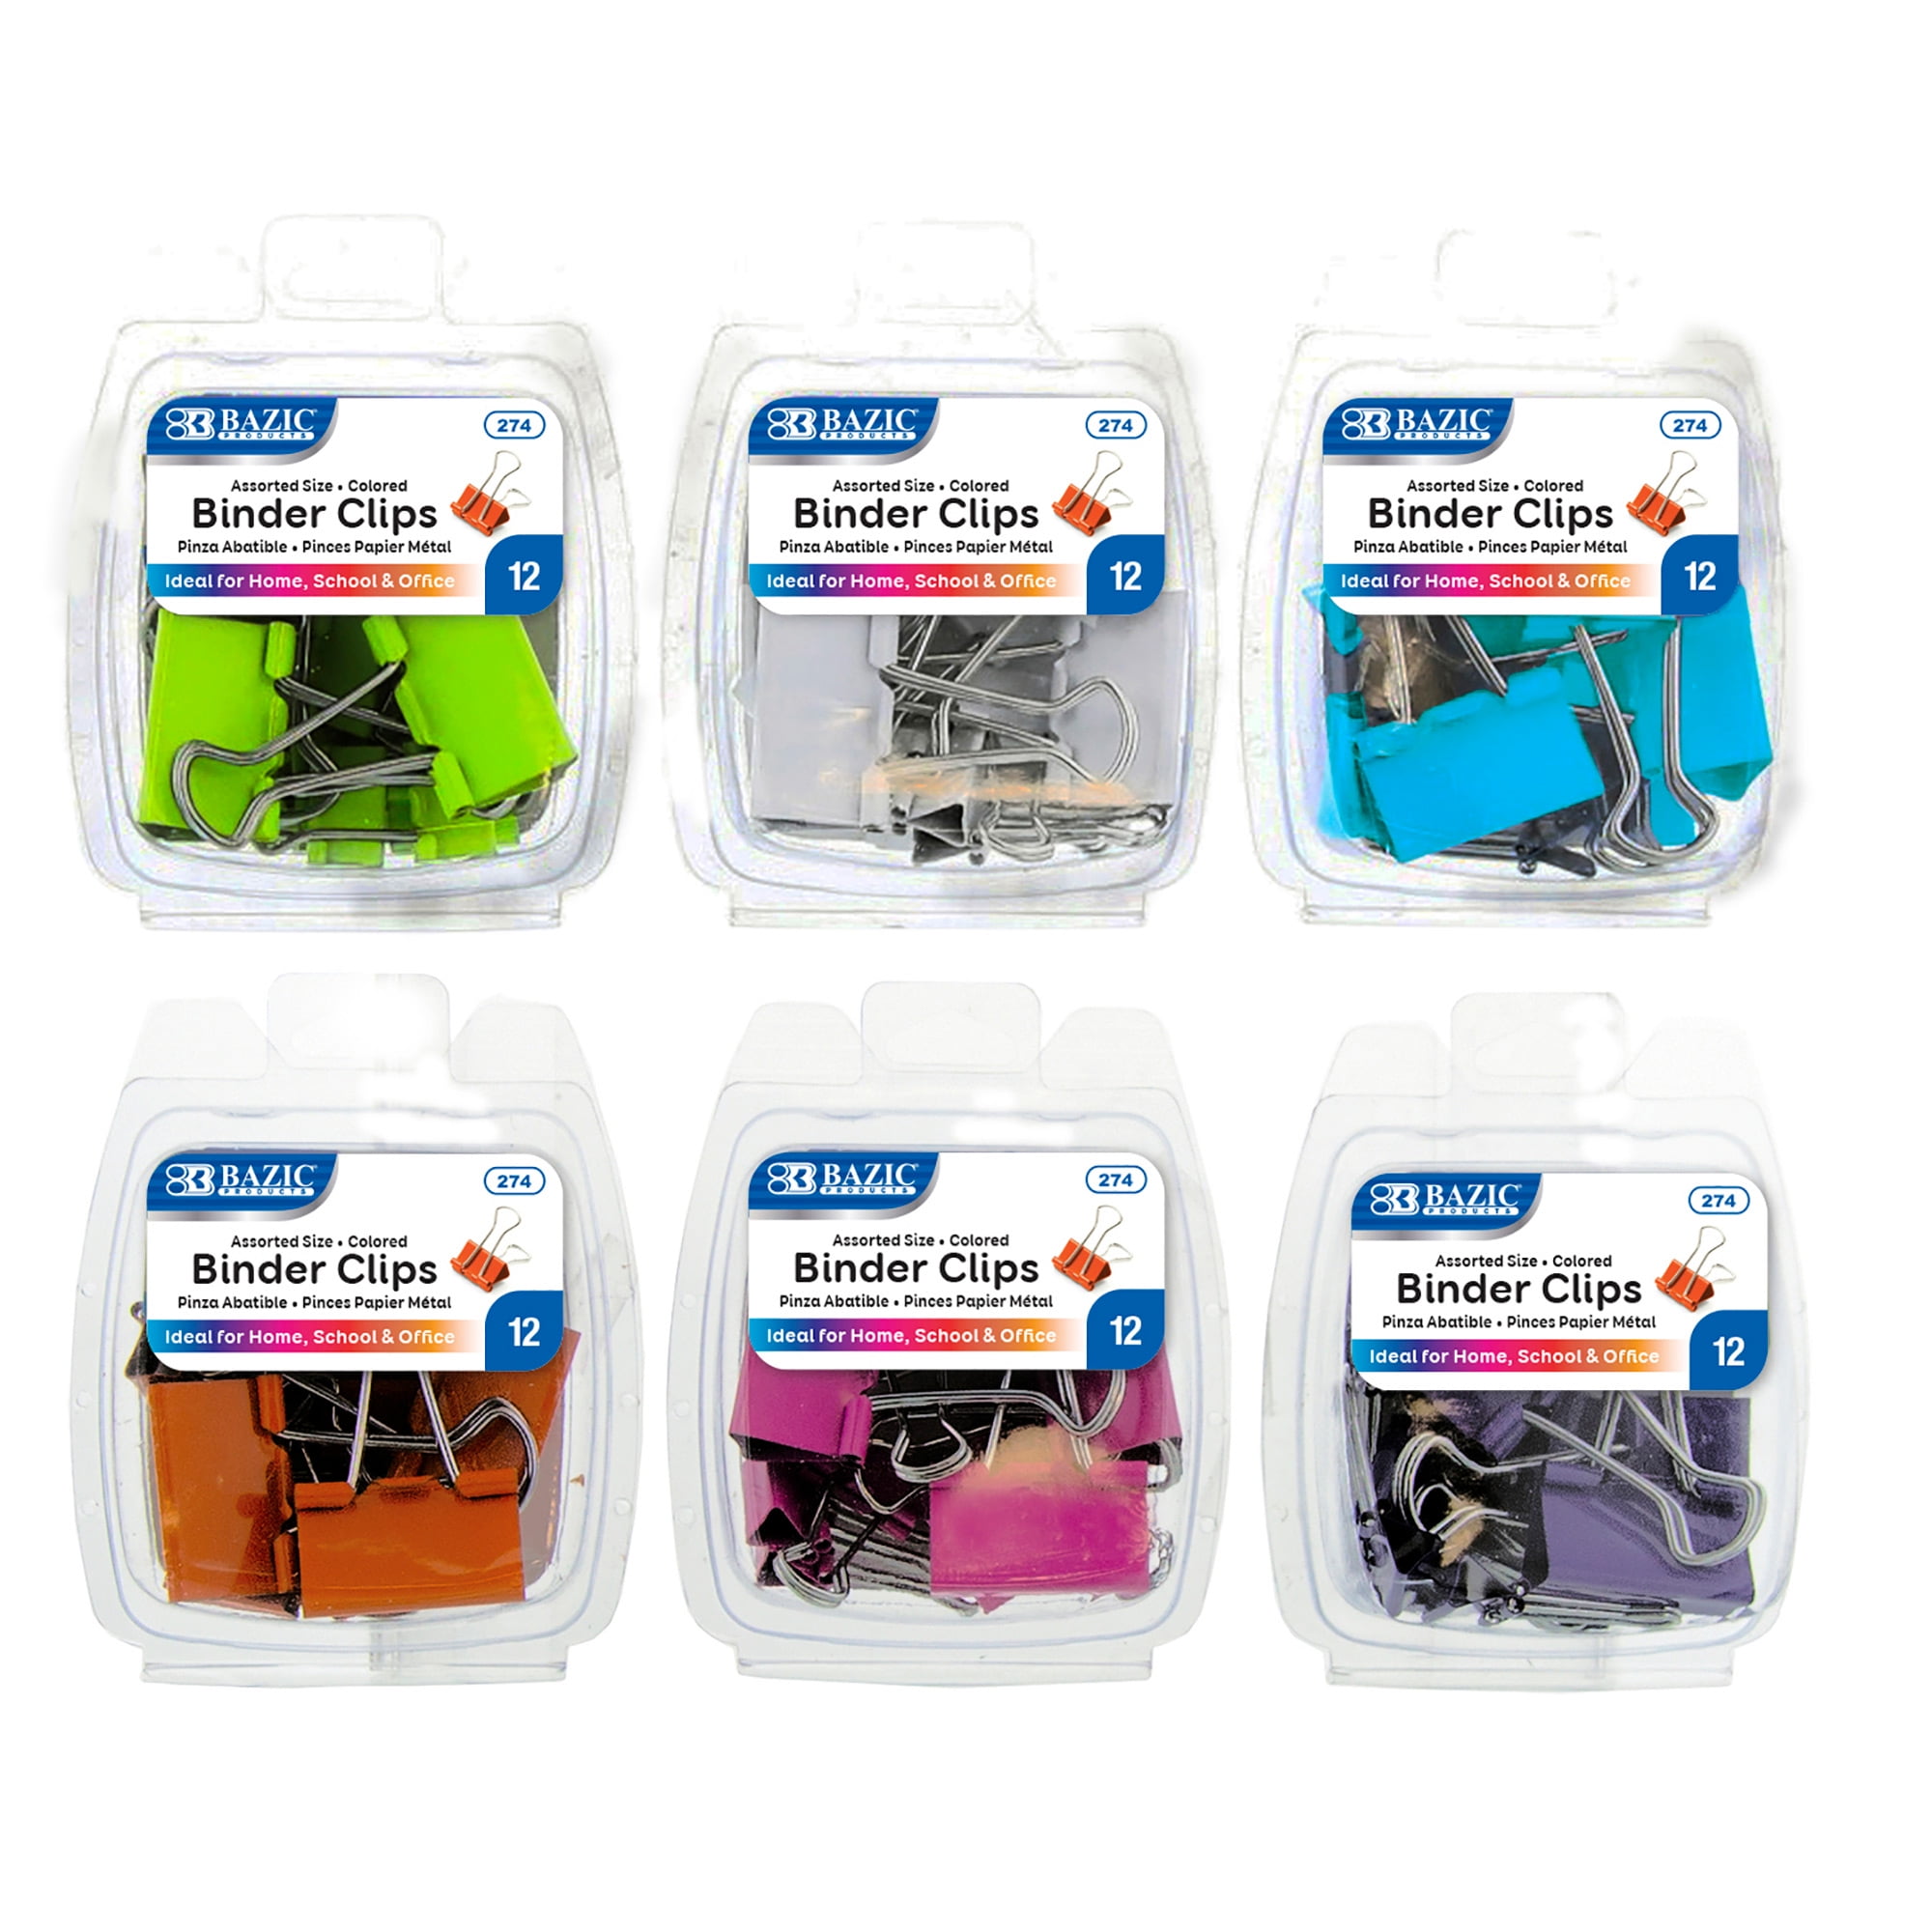 Bazic 2330441 Assorted Size Color Binder Clip, Assorted Color - 12 Per Pack - Case Of 24